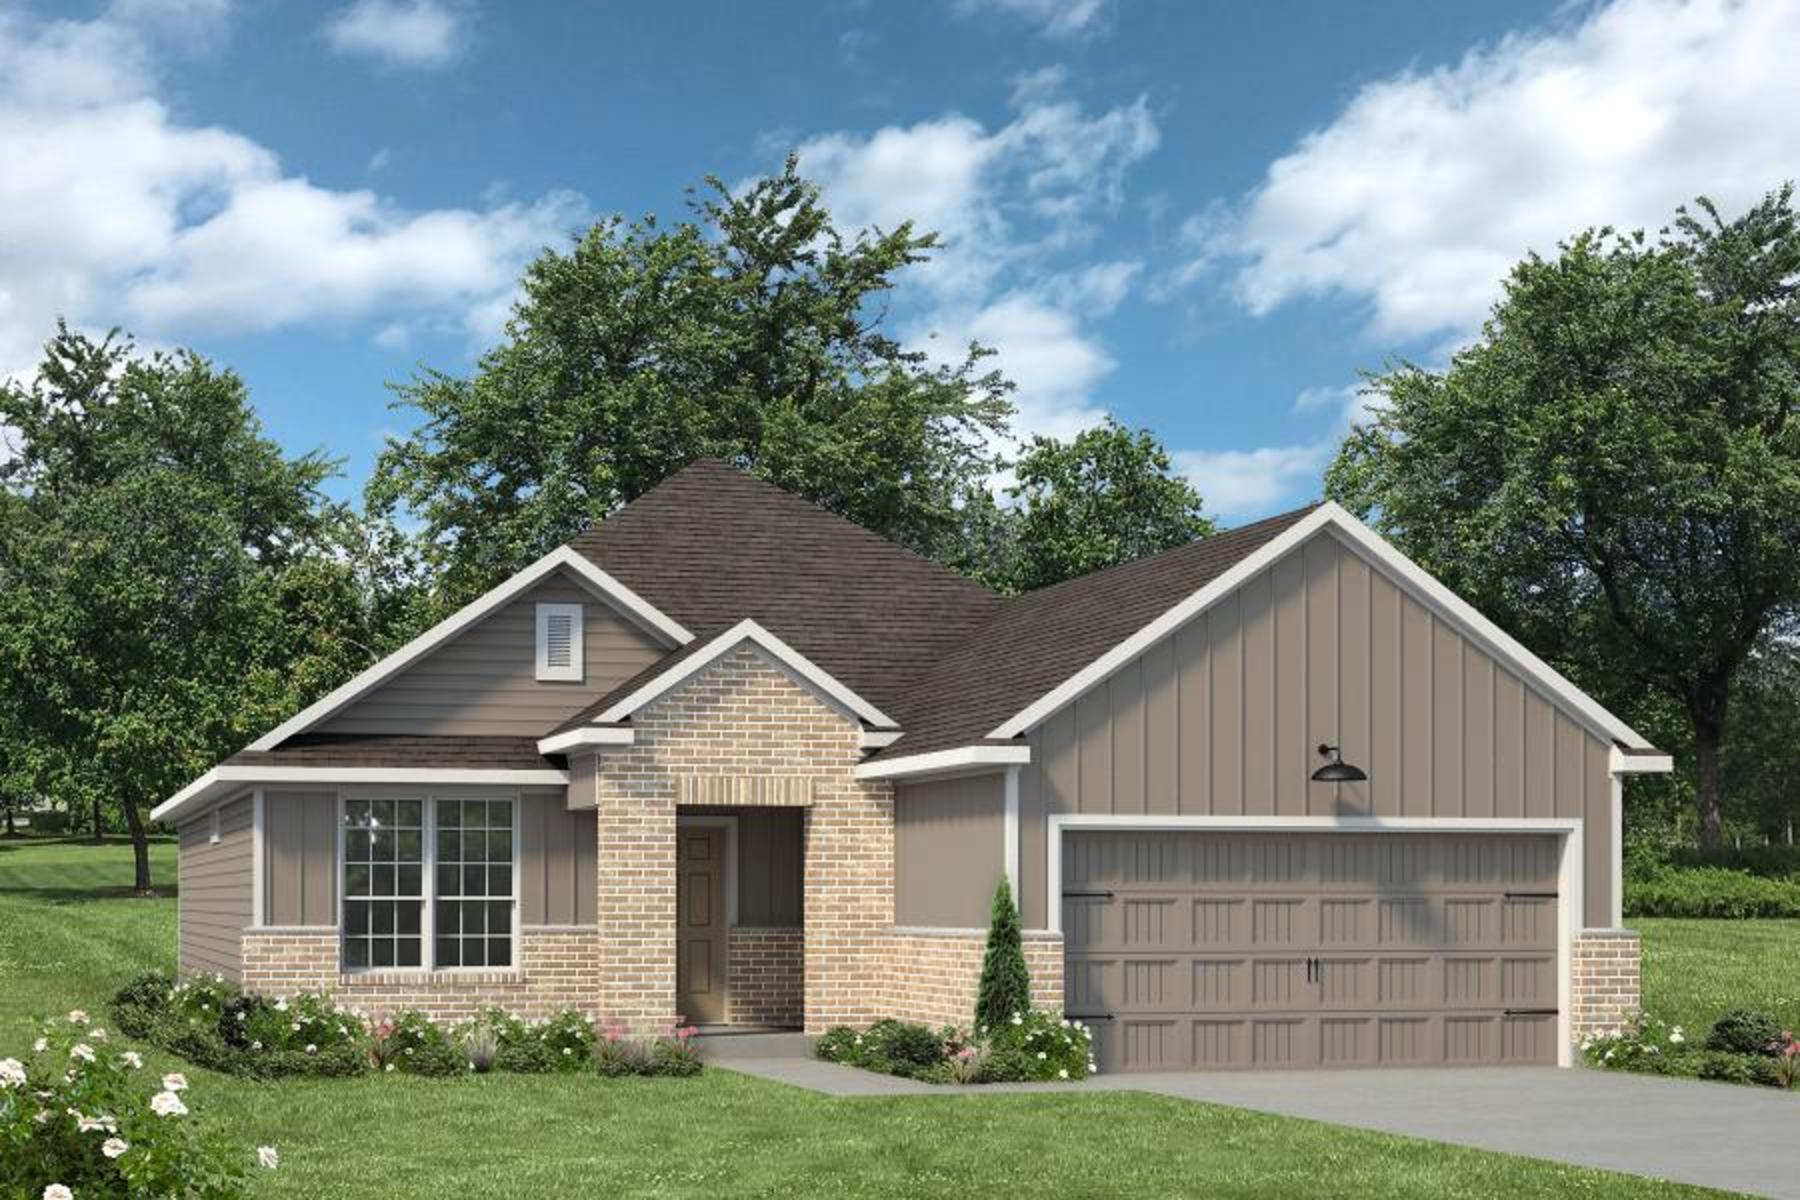 https://myhome.anewgo.com/client/stylecraft/community/Our%20Plans/plan/1846%20%7C%20Nolan%20Modern?elevId=98. The 1846 Home with 4 Bedrooms